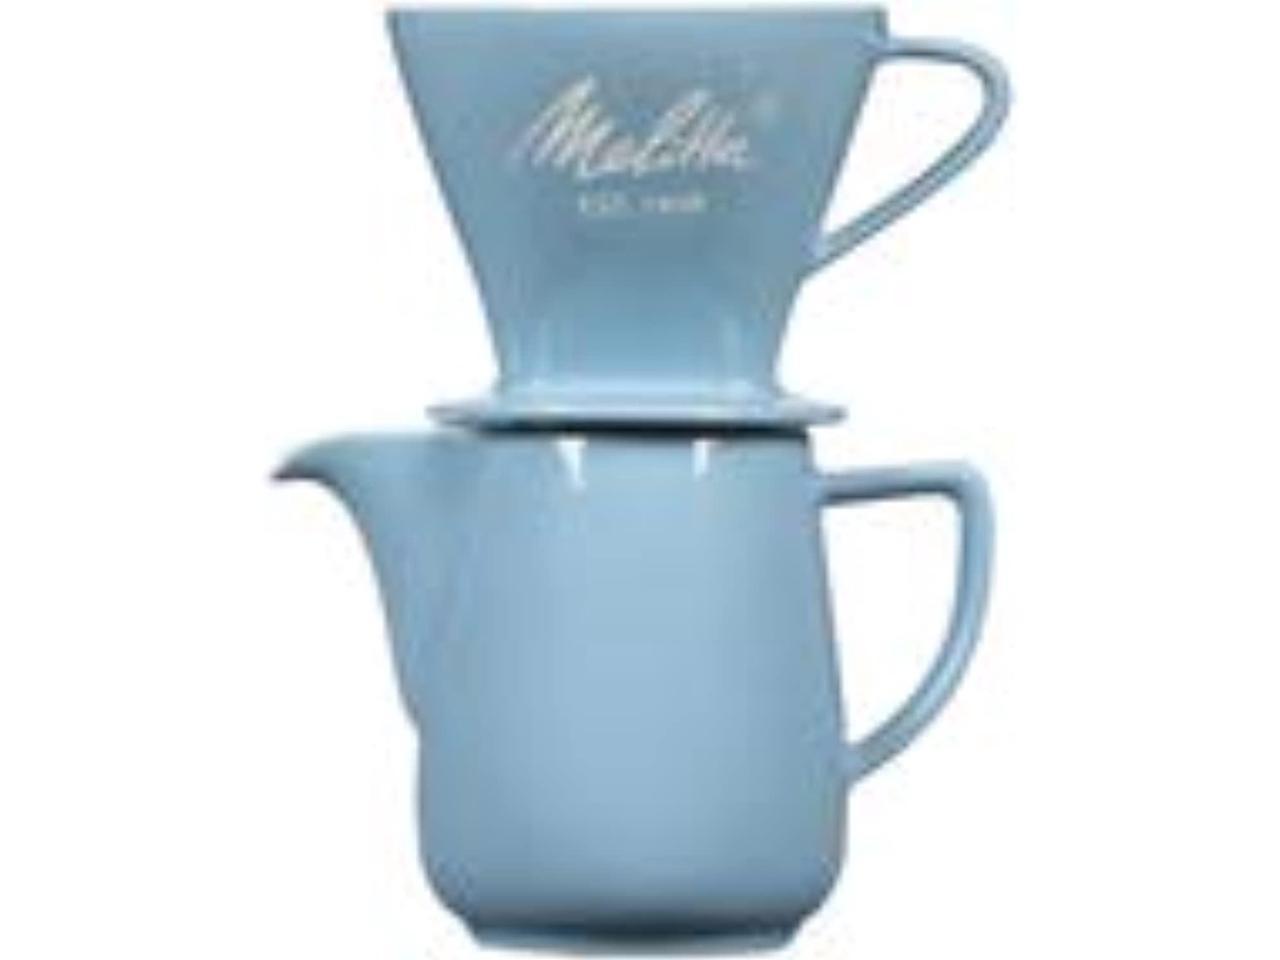 Carafe Set of 80 Cone Filters Porcelain Blue Melitta Porcelain Pour-Over Carafe Set with Cone Brewer and 20 oz